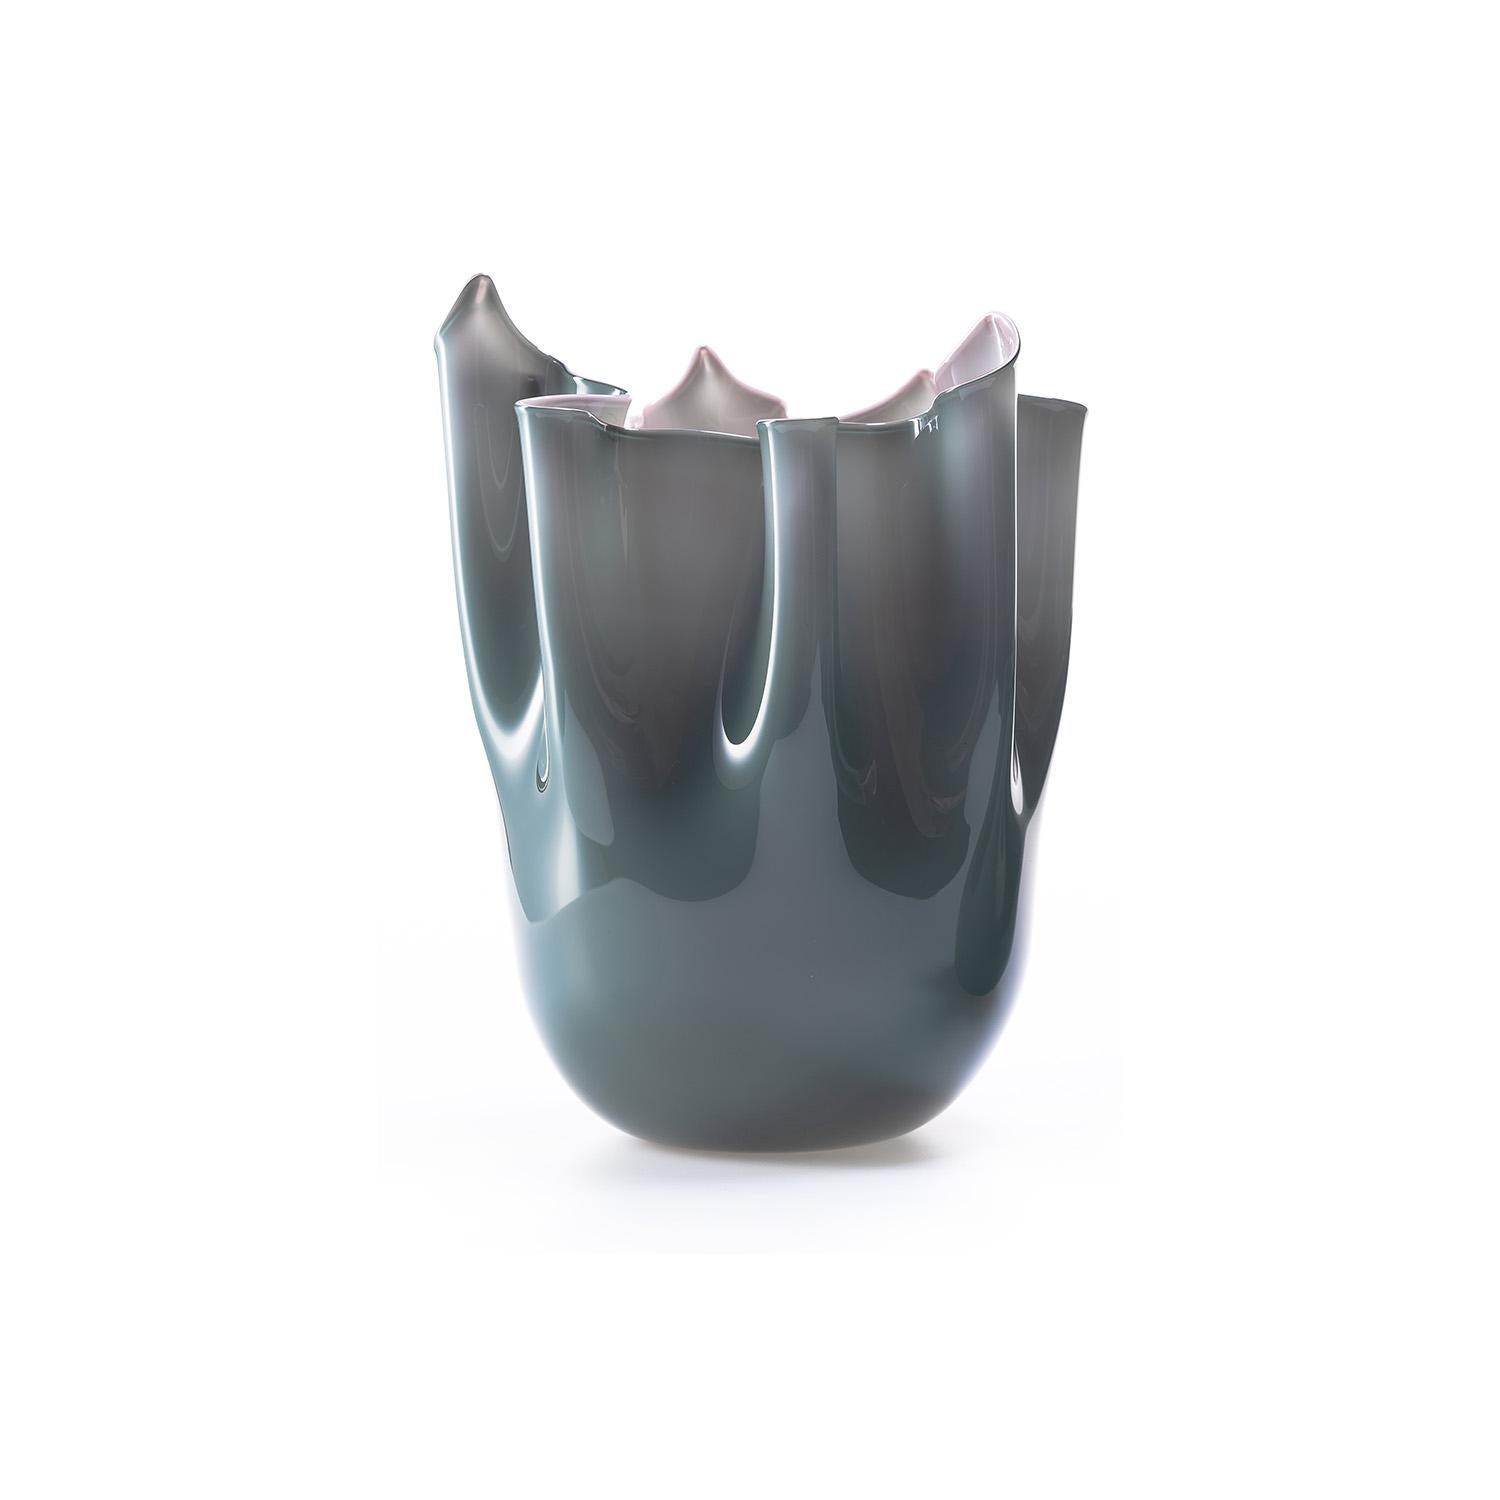 Triptych set of 3 Murano Blow Glass Elegance: Vases in Violet and Petrol Green For Sale 2